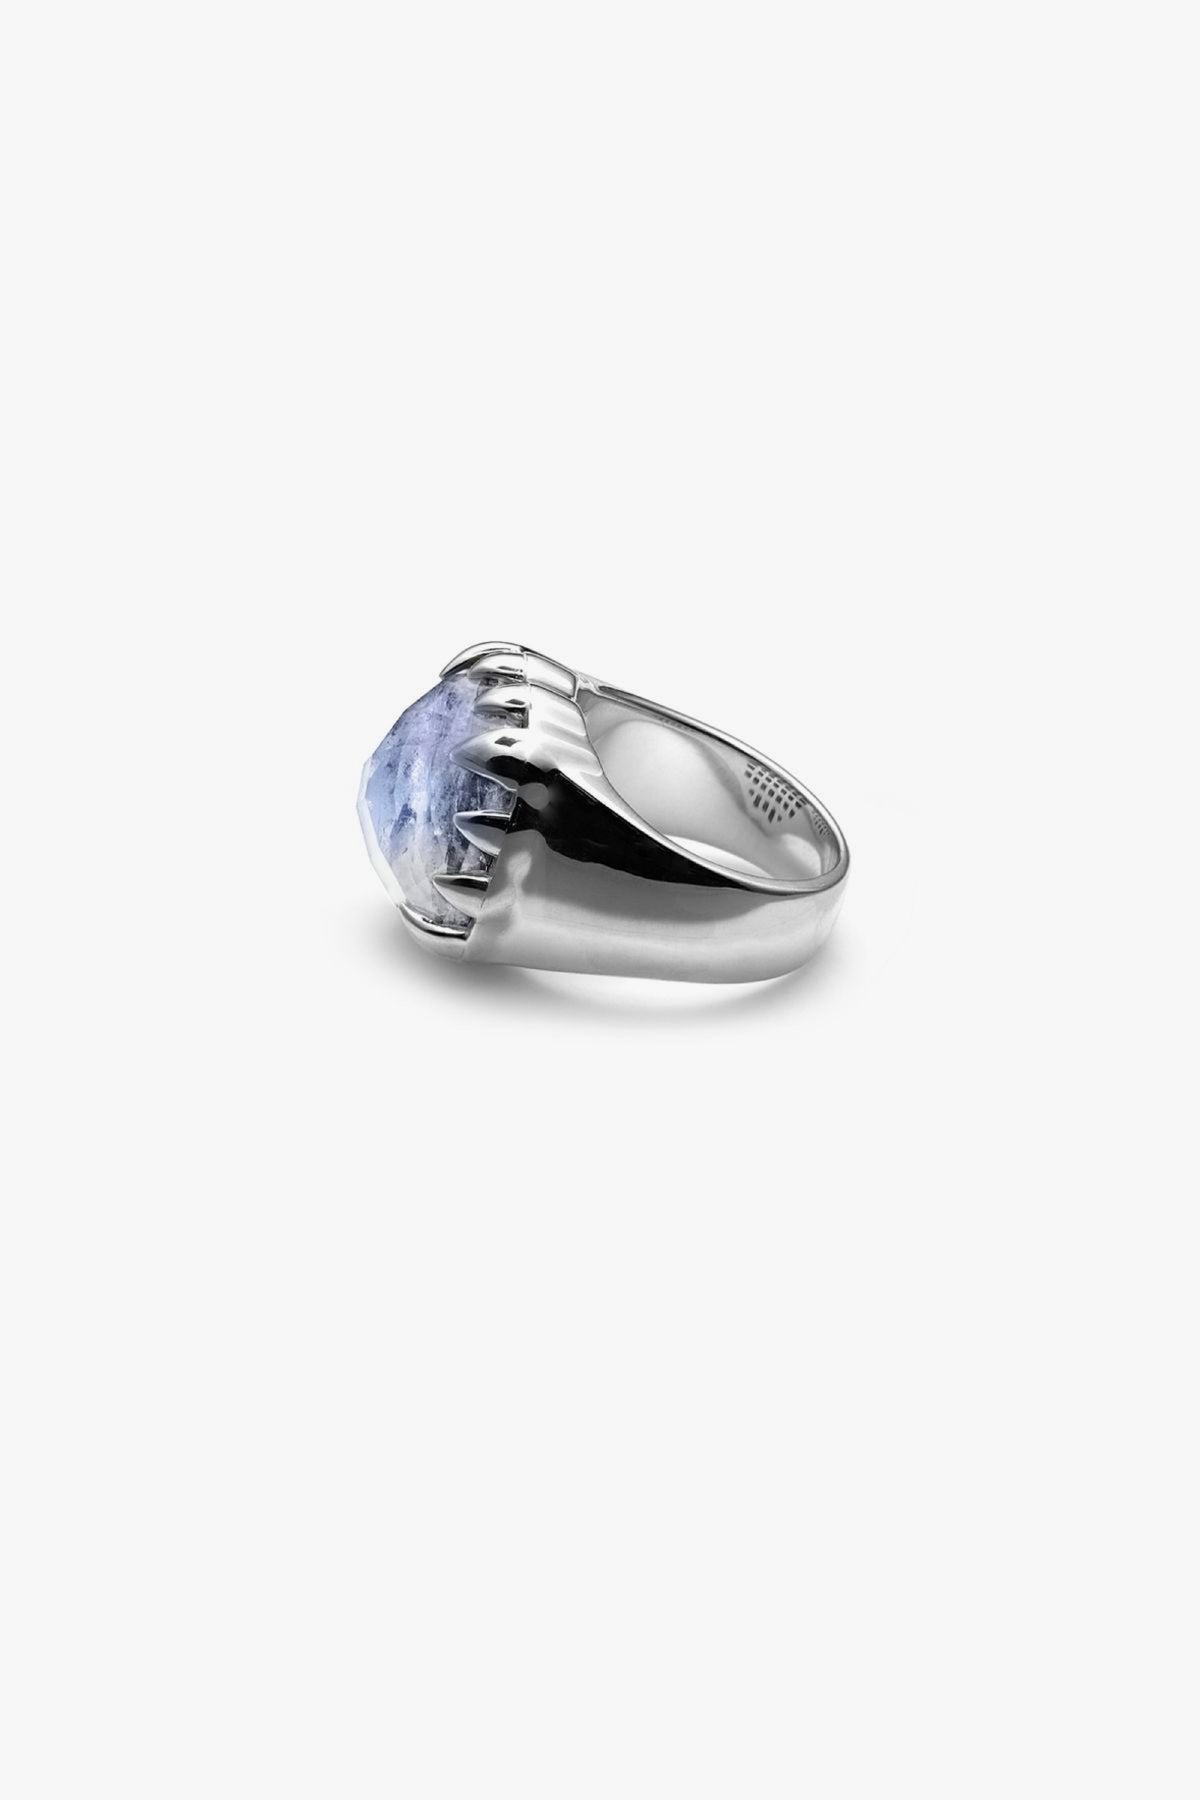 CLAW RING - MOONSTONE